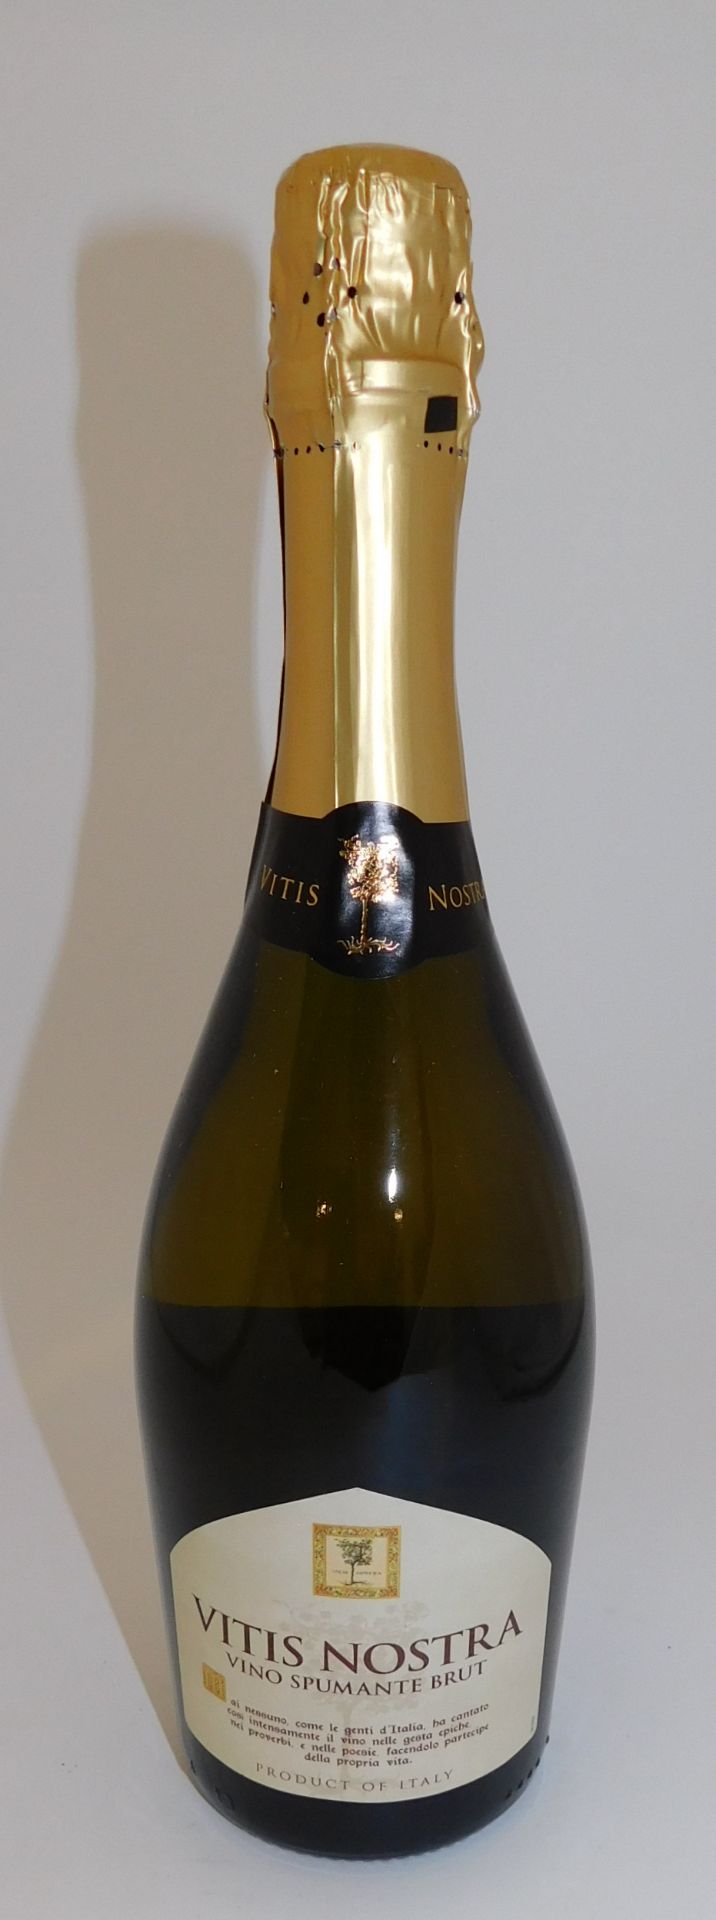 24 Bottles of Vitis Nostra Vino Spumante Brut, 75cl (Located Stockport – See General Notes for